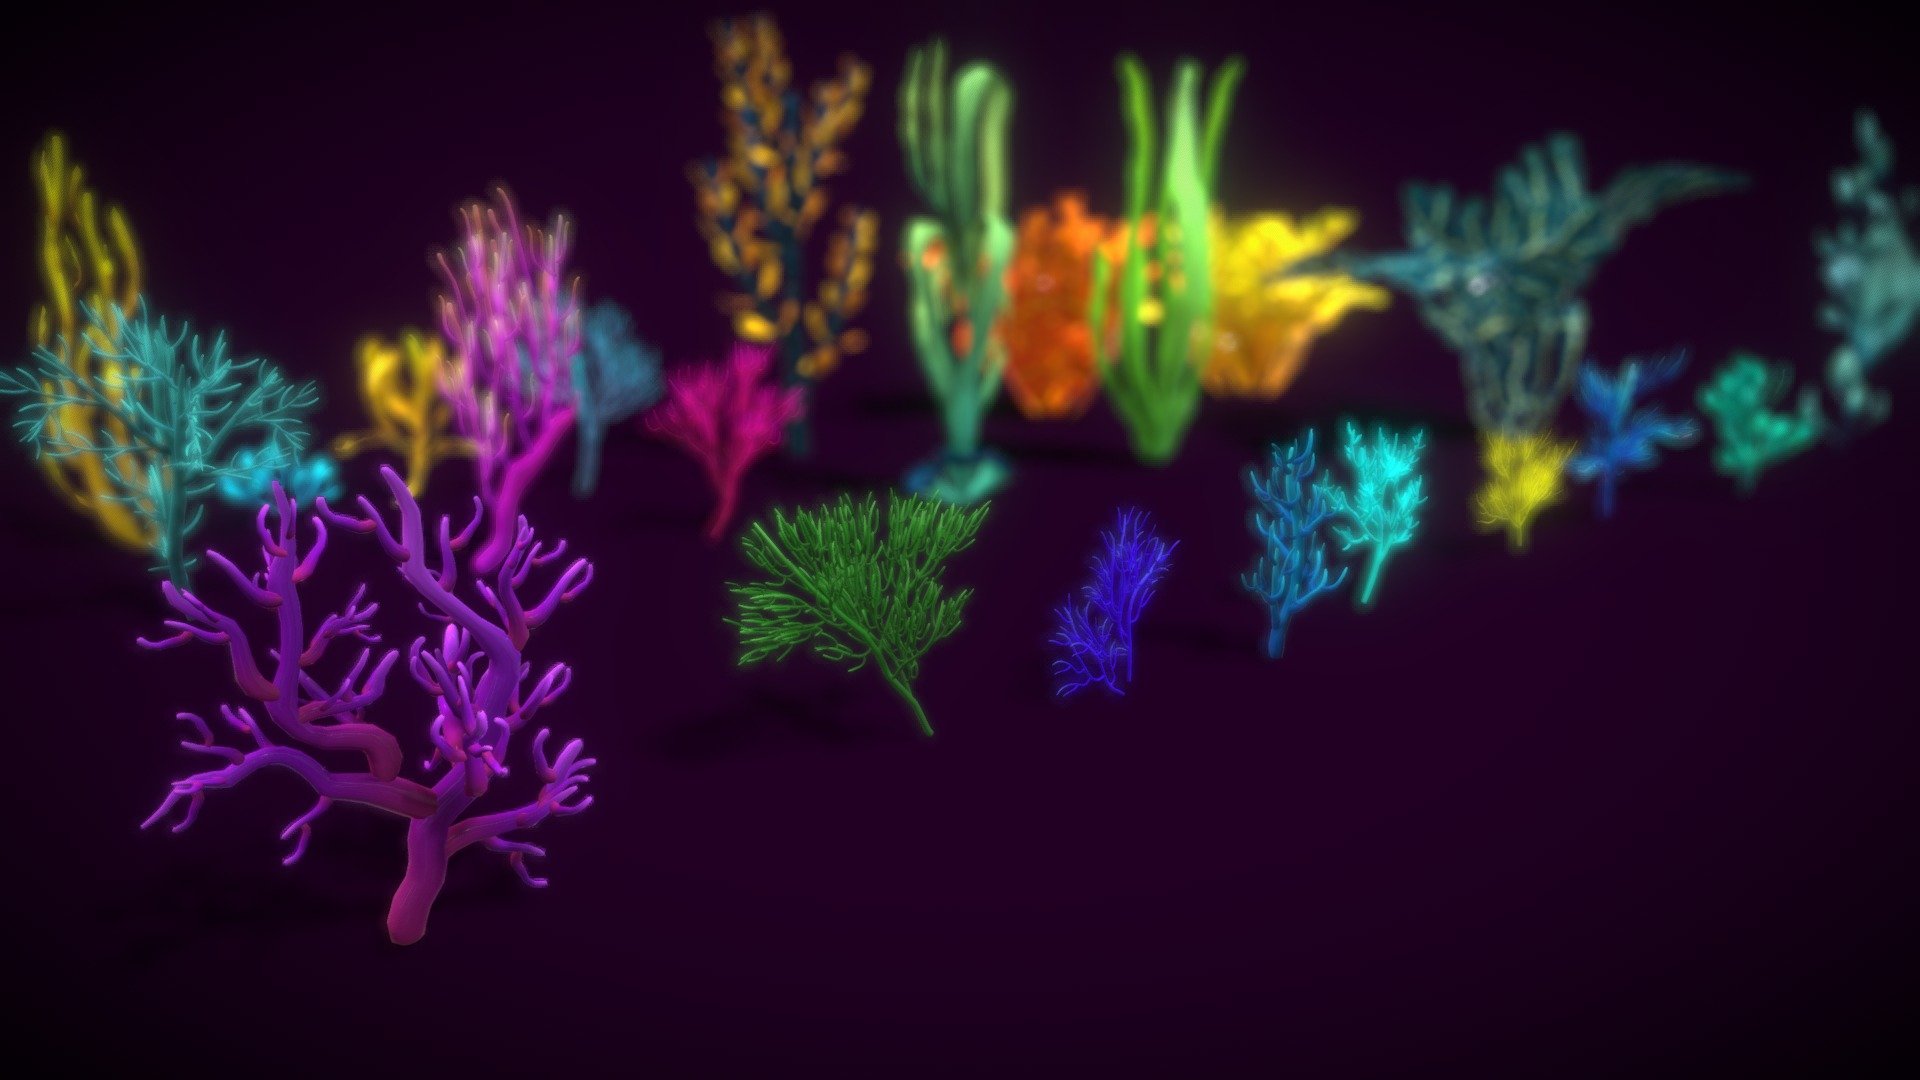 This is Cartoon Seaweed 9 is now available with animation for some coral!
As its name, this asset is extensively packed for easy creation of complex underwater environments.
All elements help you to create a colorful world for an aquarium game, fishing game, or simply decoration item in your social game!
Pack contains 22 +prefabs, easy to customize your own forest of underwater plants.
In detail, the model is attached as below:
- Seaweed : 22+ types in the 100+ variations
- Atlas texture with size 2048/2048
- Geometry: +Triangles: 422152 +Polygons: 218291 +Vertices: 225082 - Cartoon Seaweed 9 - Buy Royalty Free 3D model by vustudios 3d model